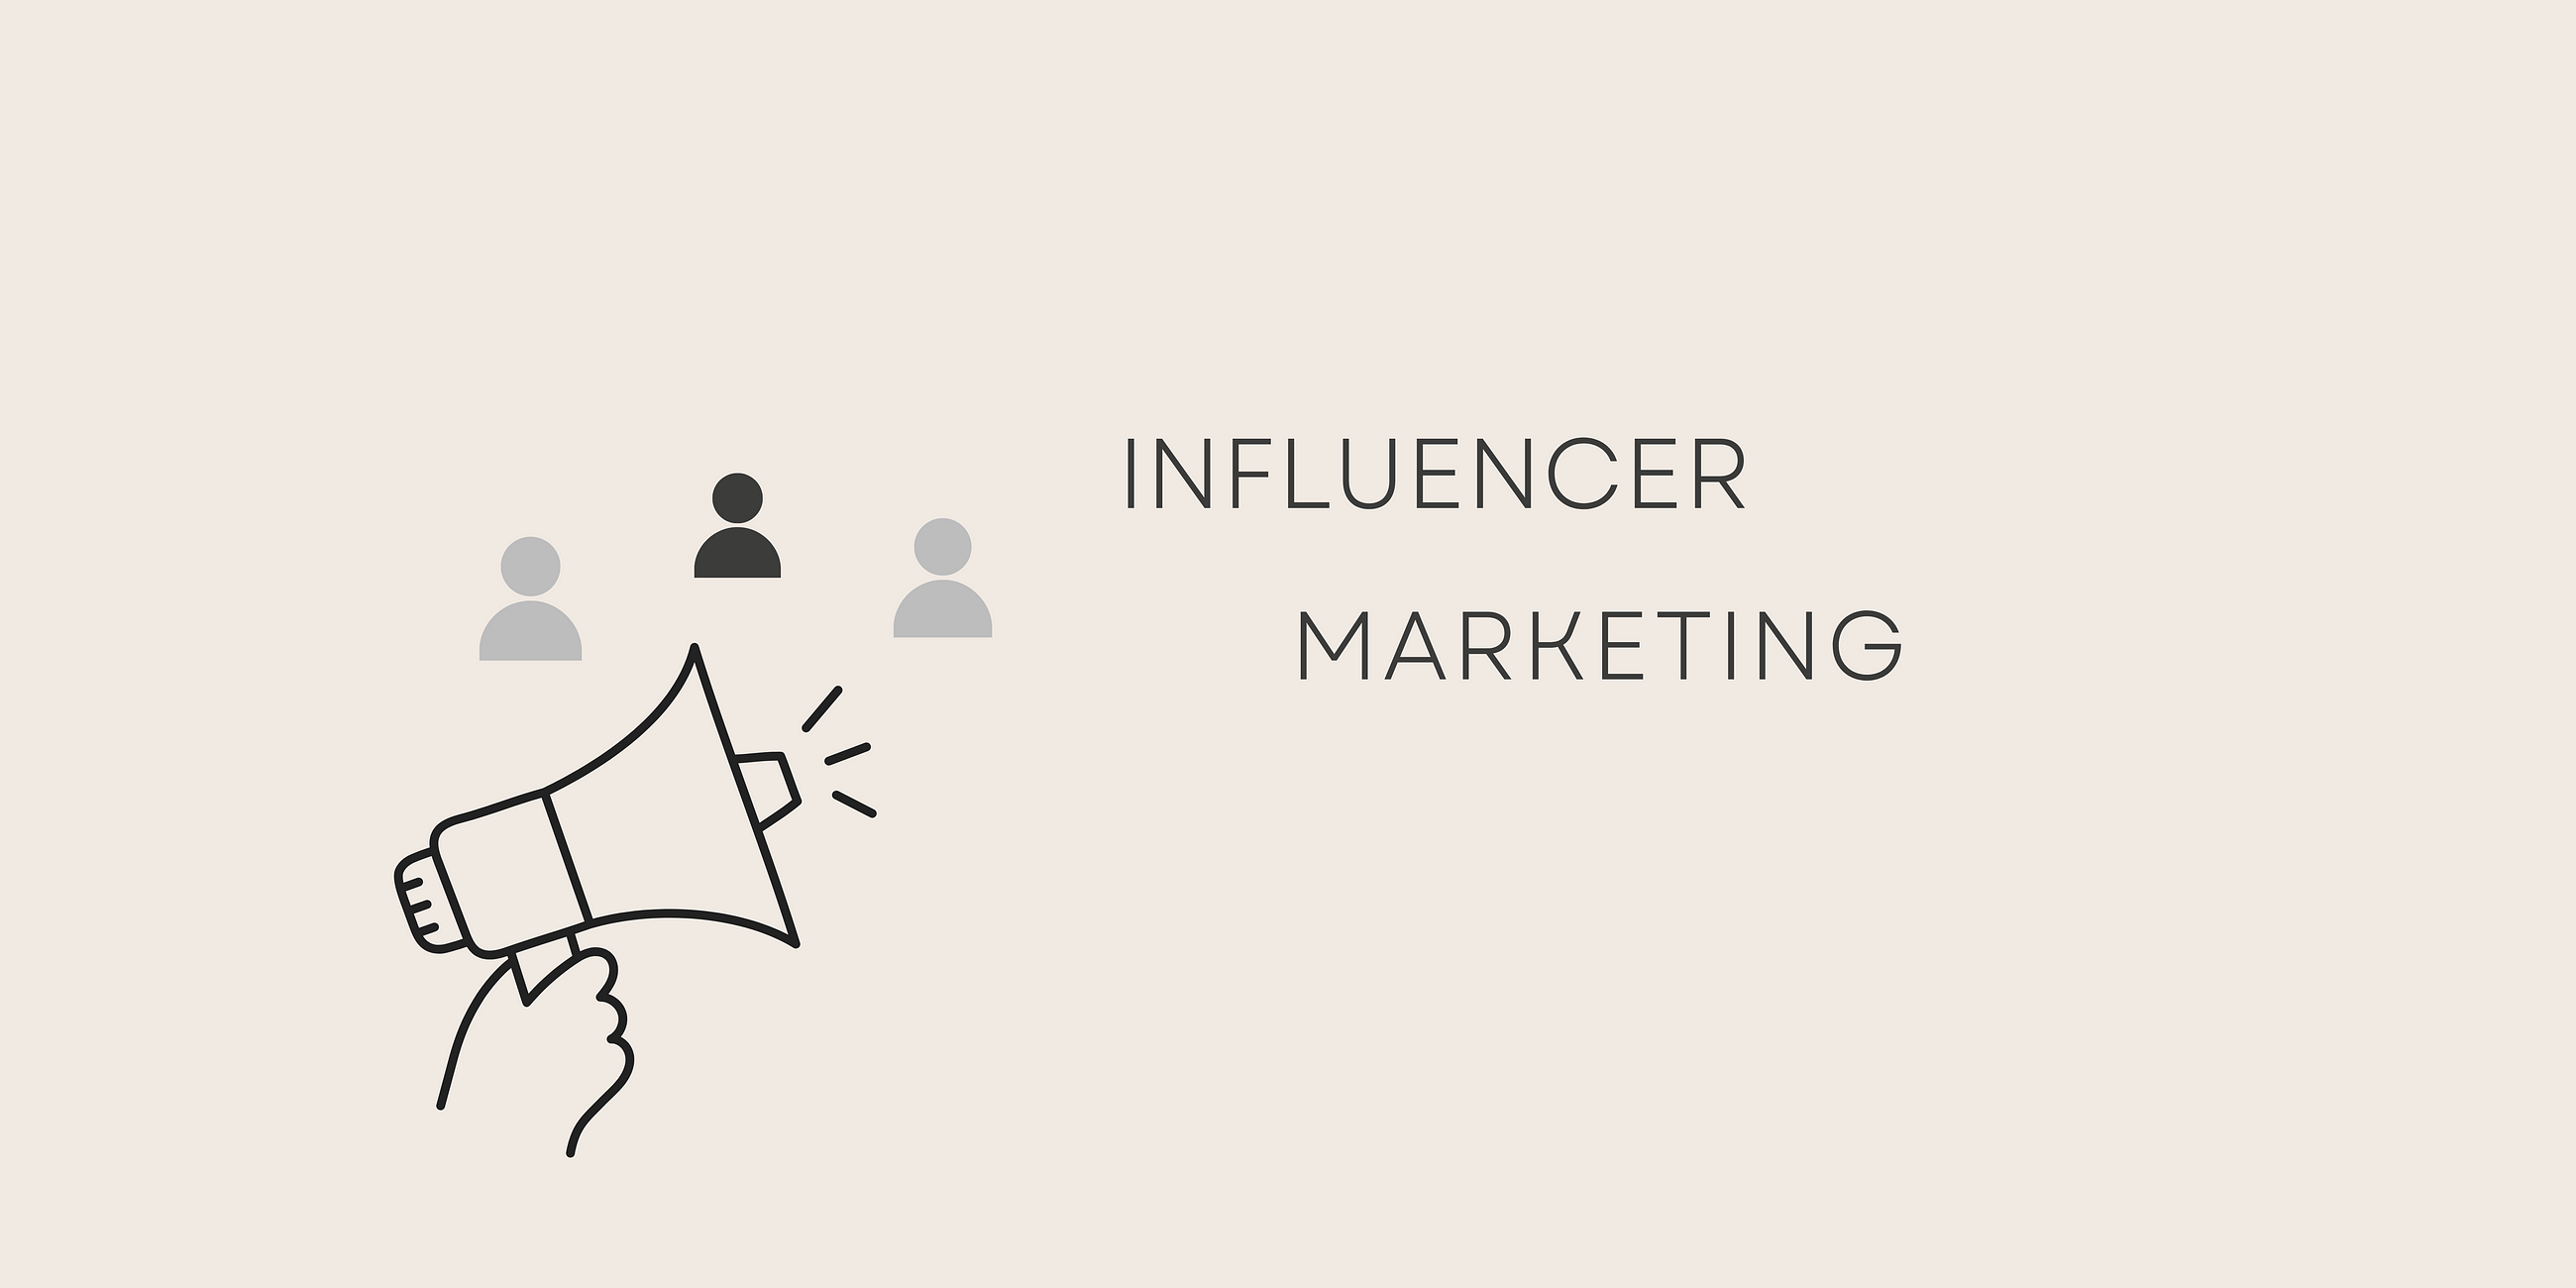 How can businesses use influencer marketing to reach new customers and boost brand awareness?